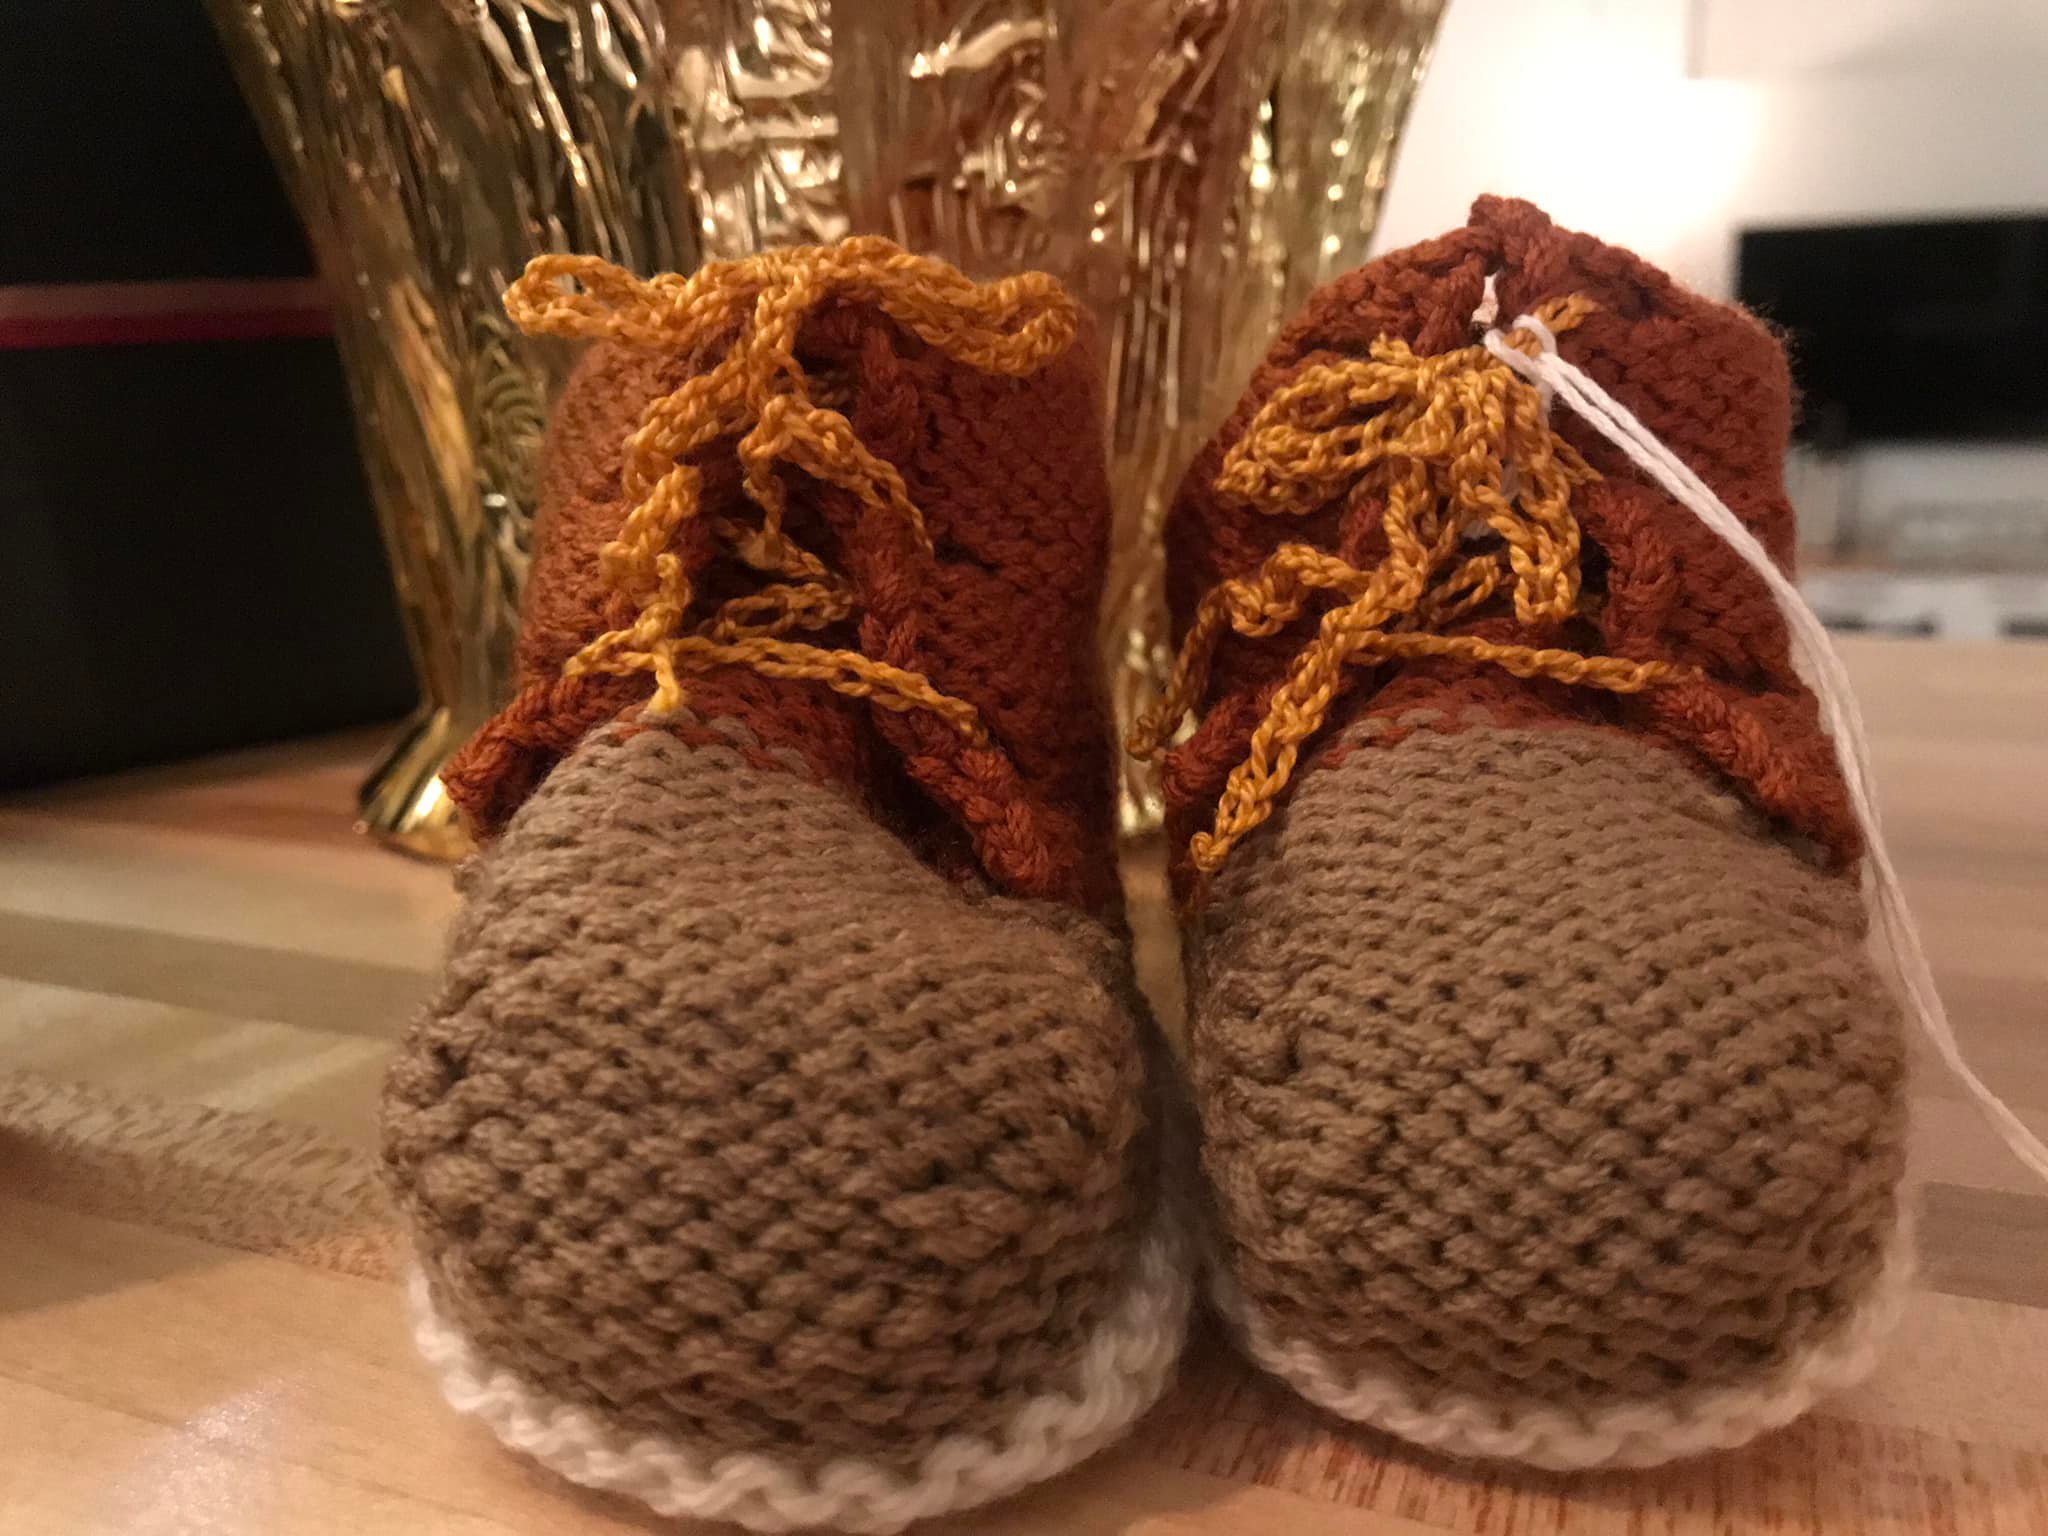 Shoe Knitting done in knitting nook with fingering weight Rambouillet